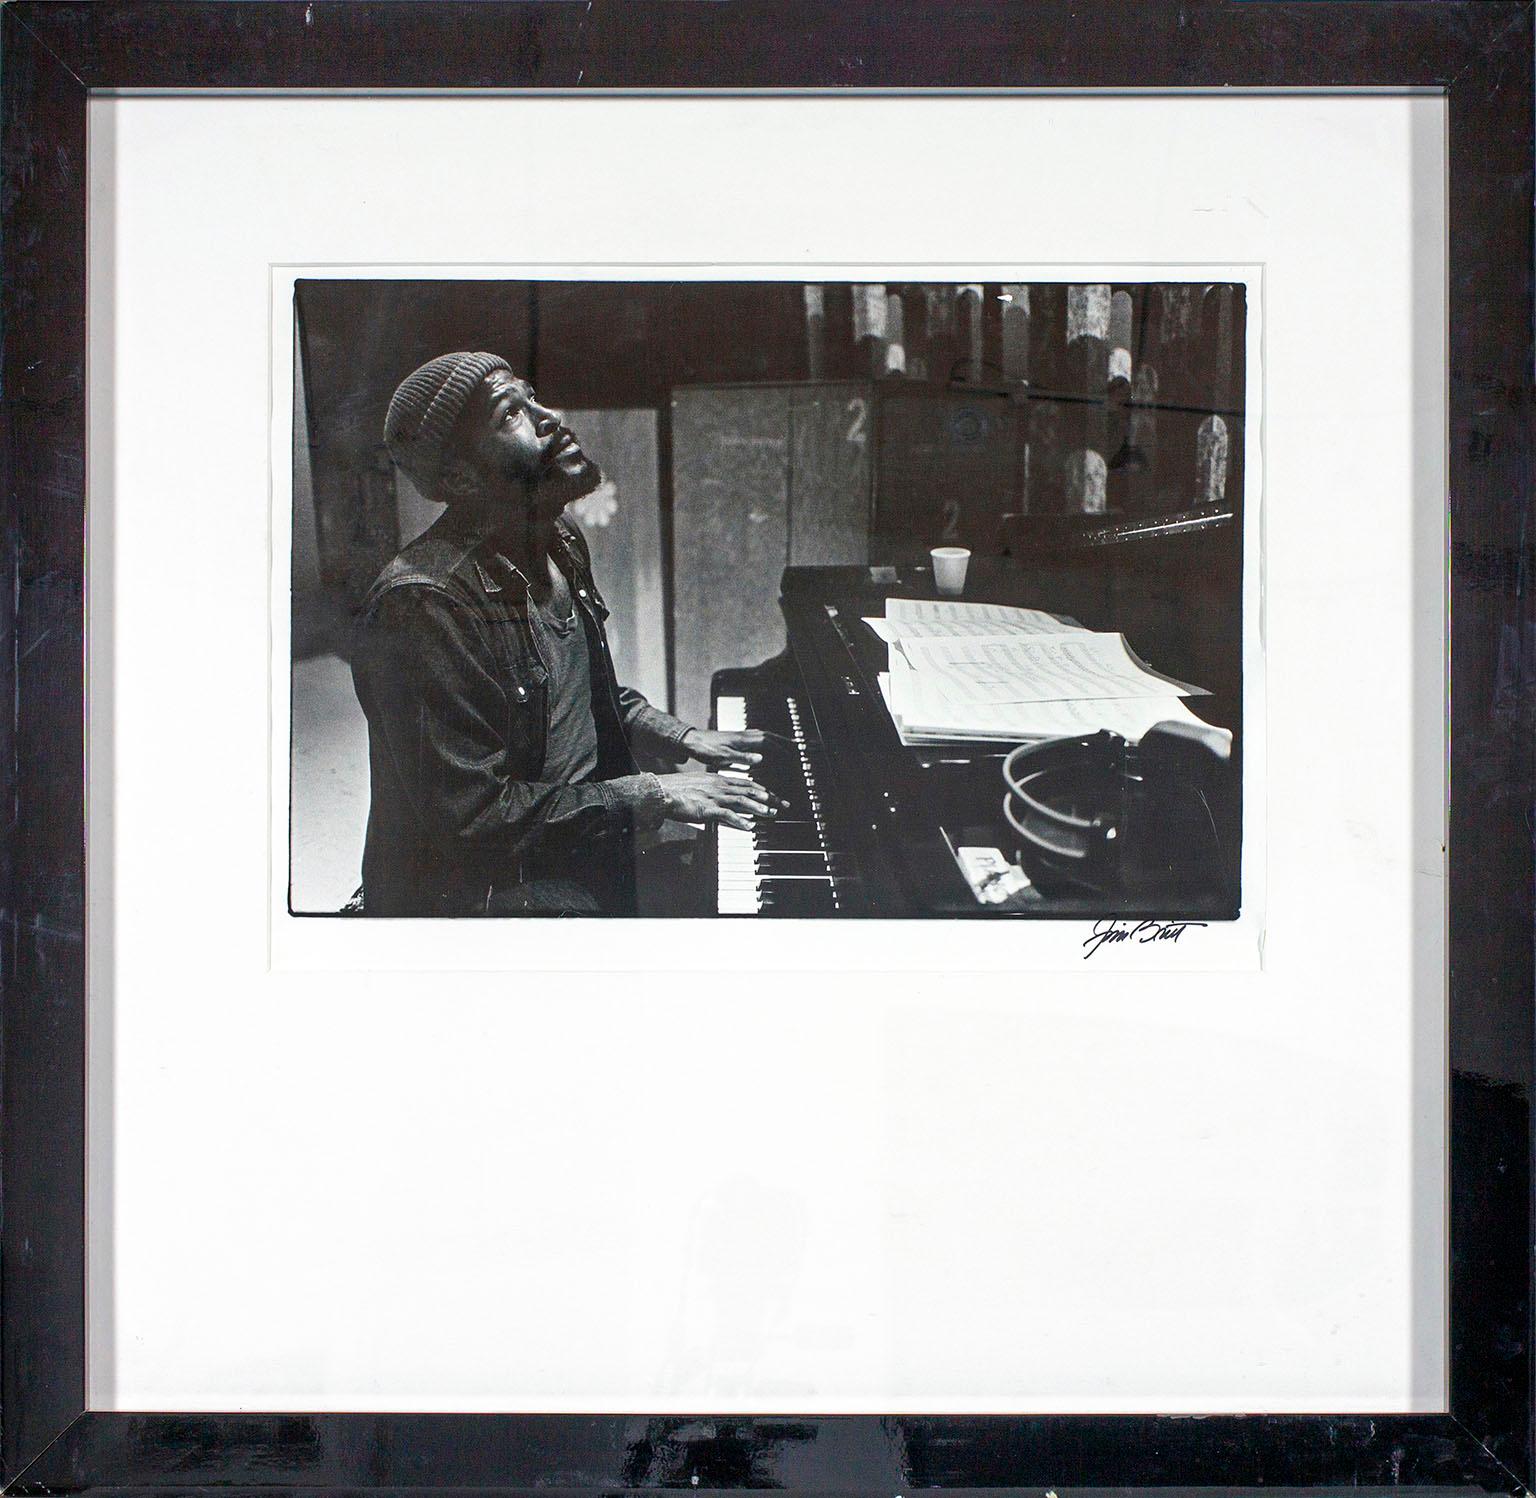 "Marvin Gaye at the Recording Session for 'Let's Get It On'" black and white framed photograph hand signed by Jim Britt. This image is in the collection of the Smithsonian Portrait Gallery in Washington, D.C. The photograph offered here was